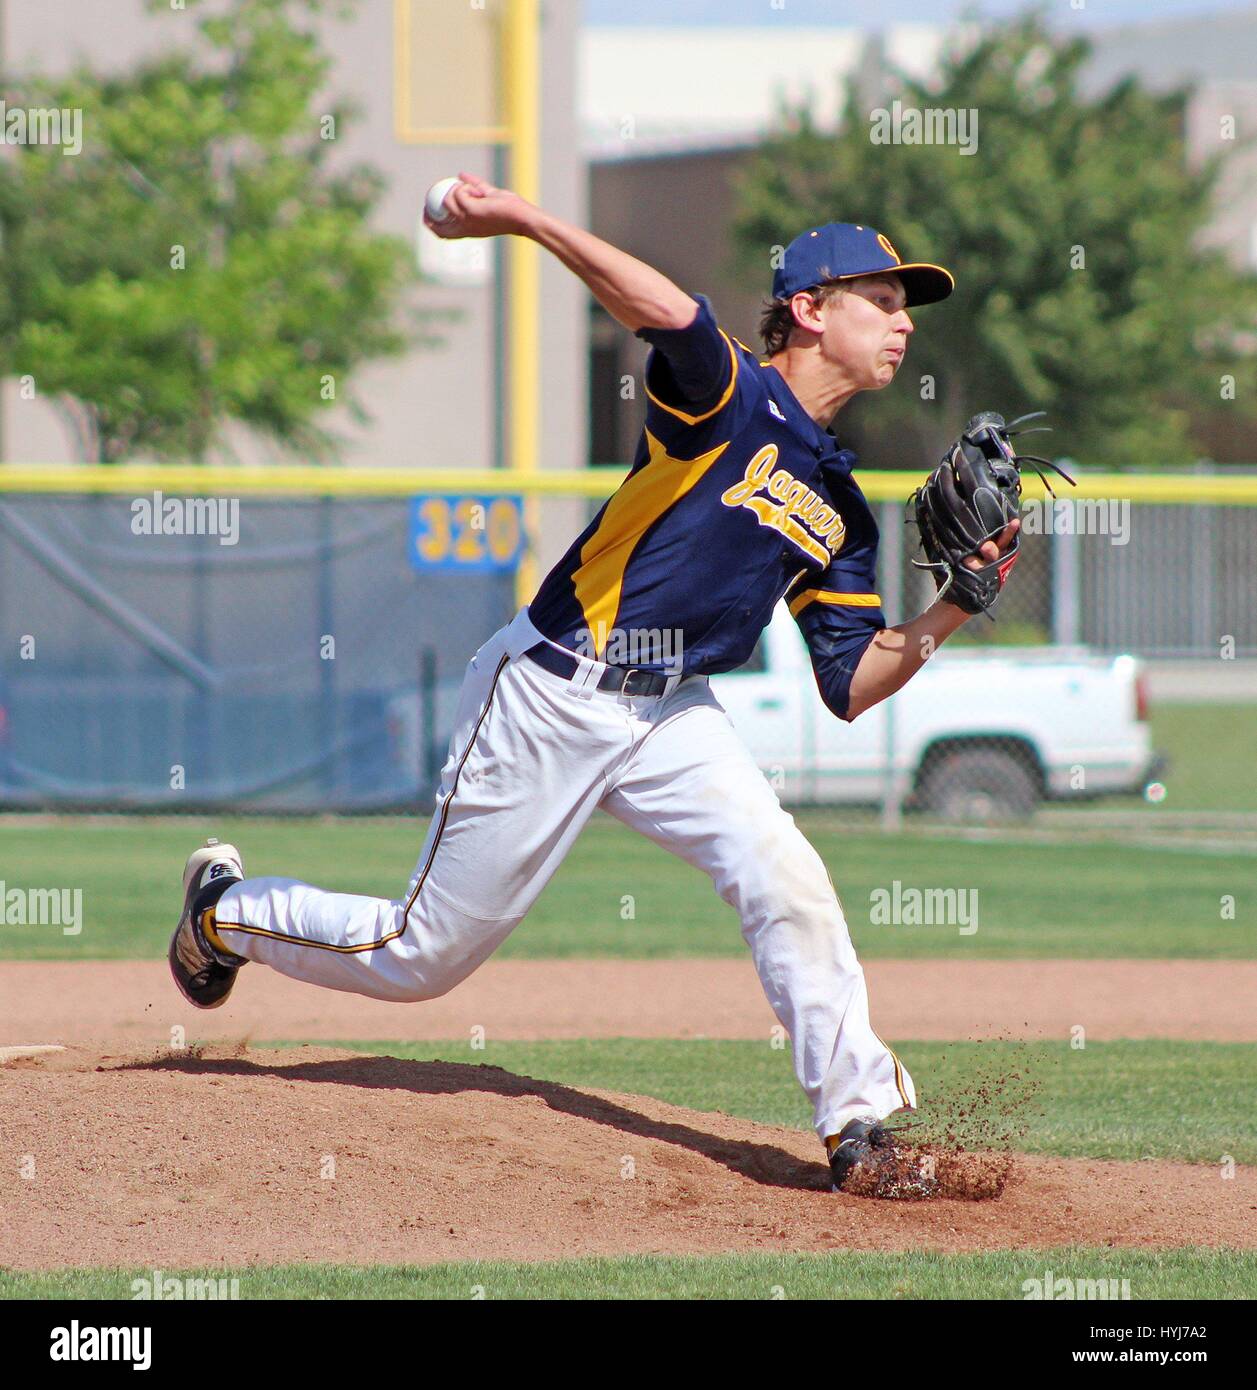 California, USA. 4th Apr, 2017. Gregori junior pitcher Matt Dallas tossed the first perfect game in school history on Friday, April 29, 2016, shutting down Enochs in a 10-0 win. Credit: James Burns/ZUMA Wire/Alamy Live News Stock Photo